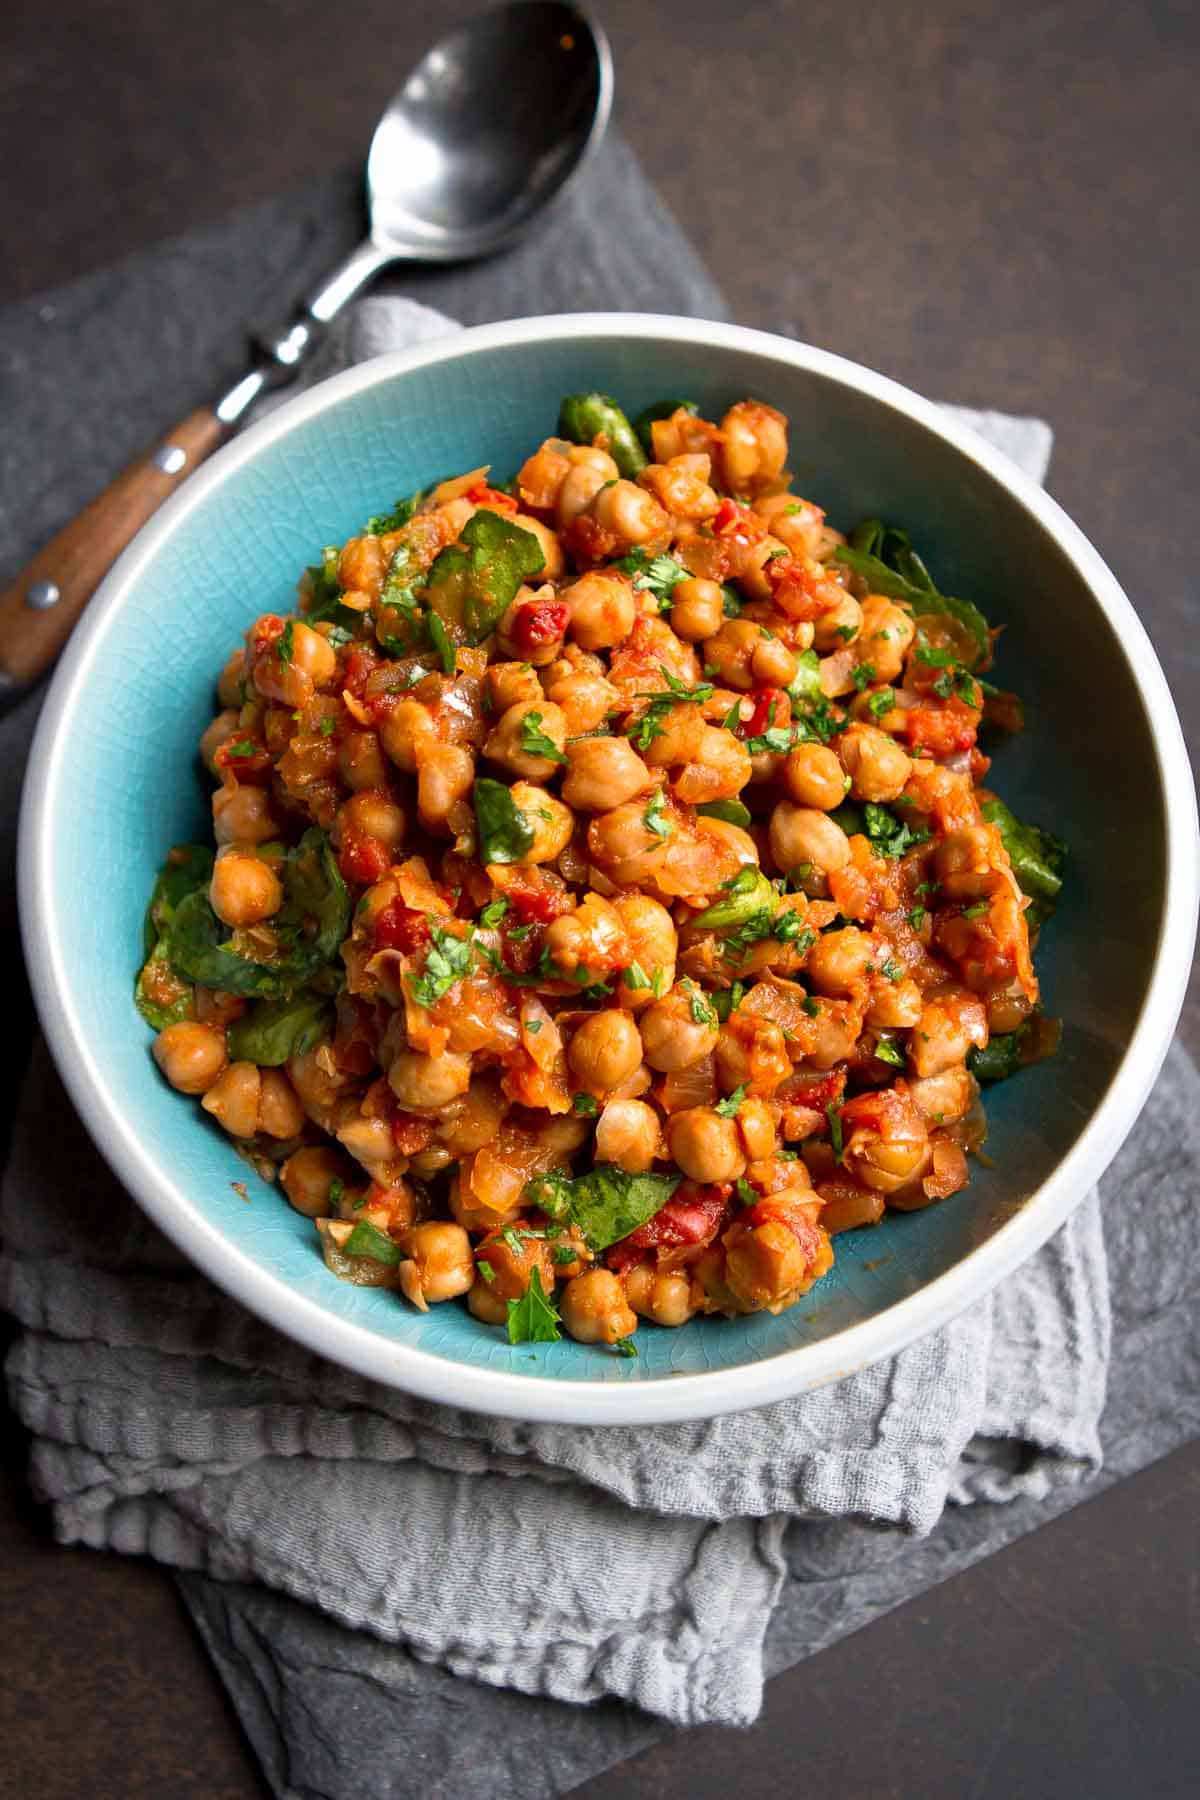 This Crockpot Spiced Chickpea Stew (Vegan) is one of the first meatless meals I fell in love with. So much flavor and your kitchen will smell amazing!  | Vegetarian | Slow Cooker | Mediterranean | Easy | Dinner | Healthy | Spinach | Chana masala